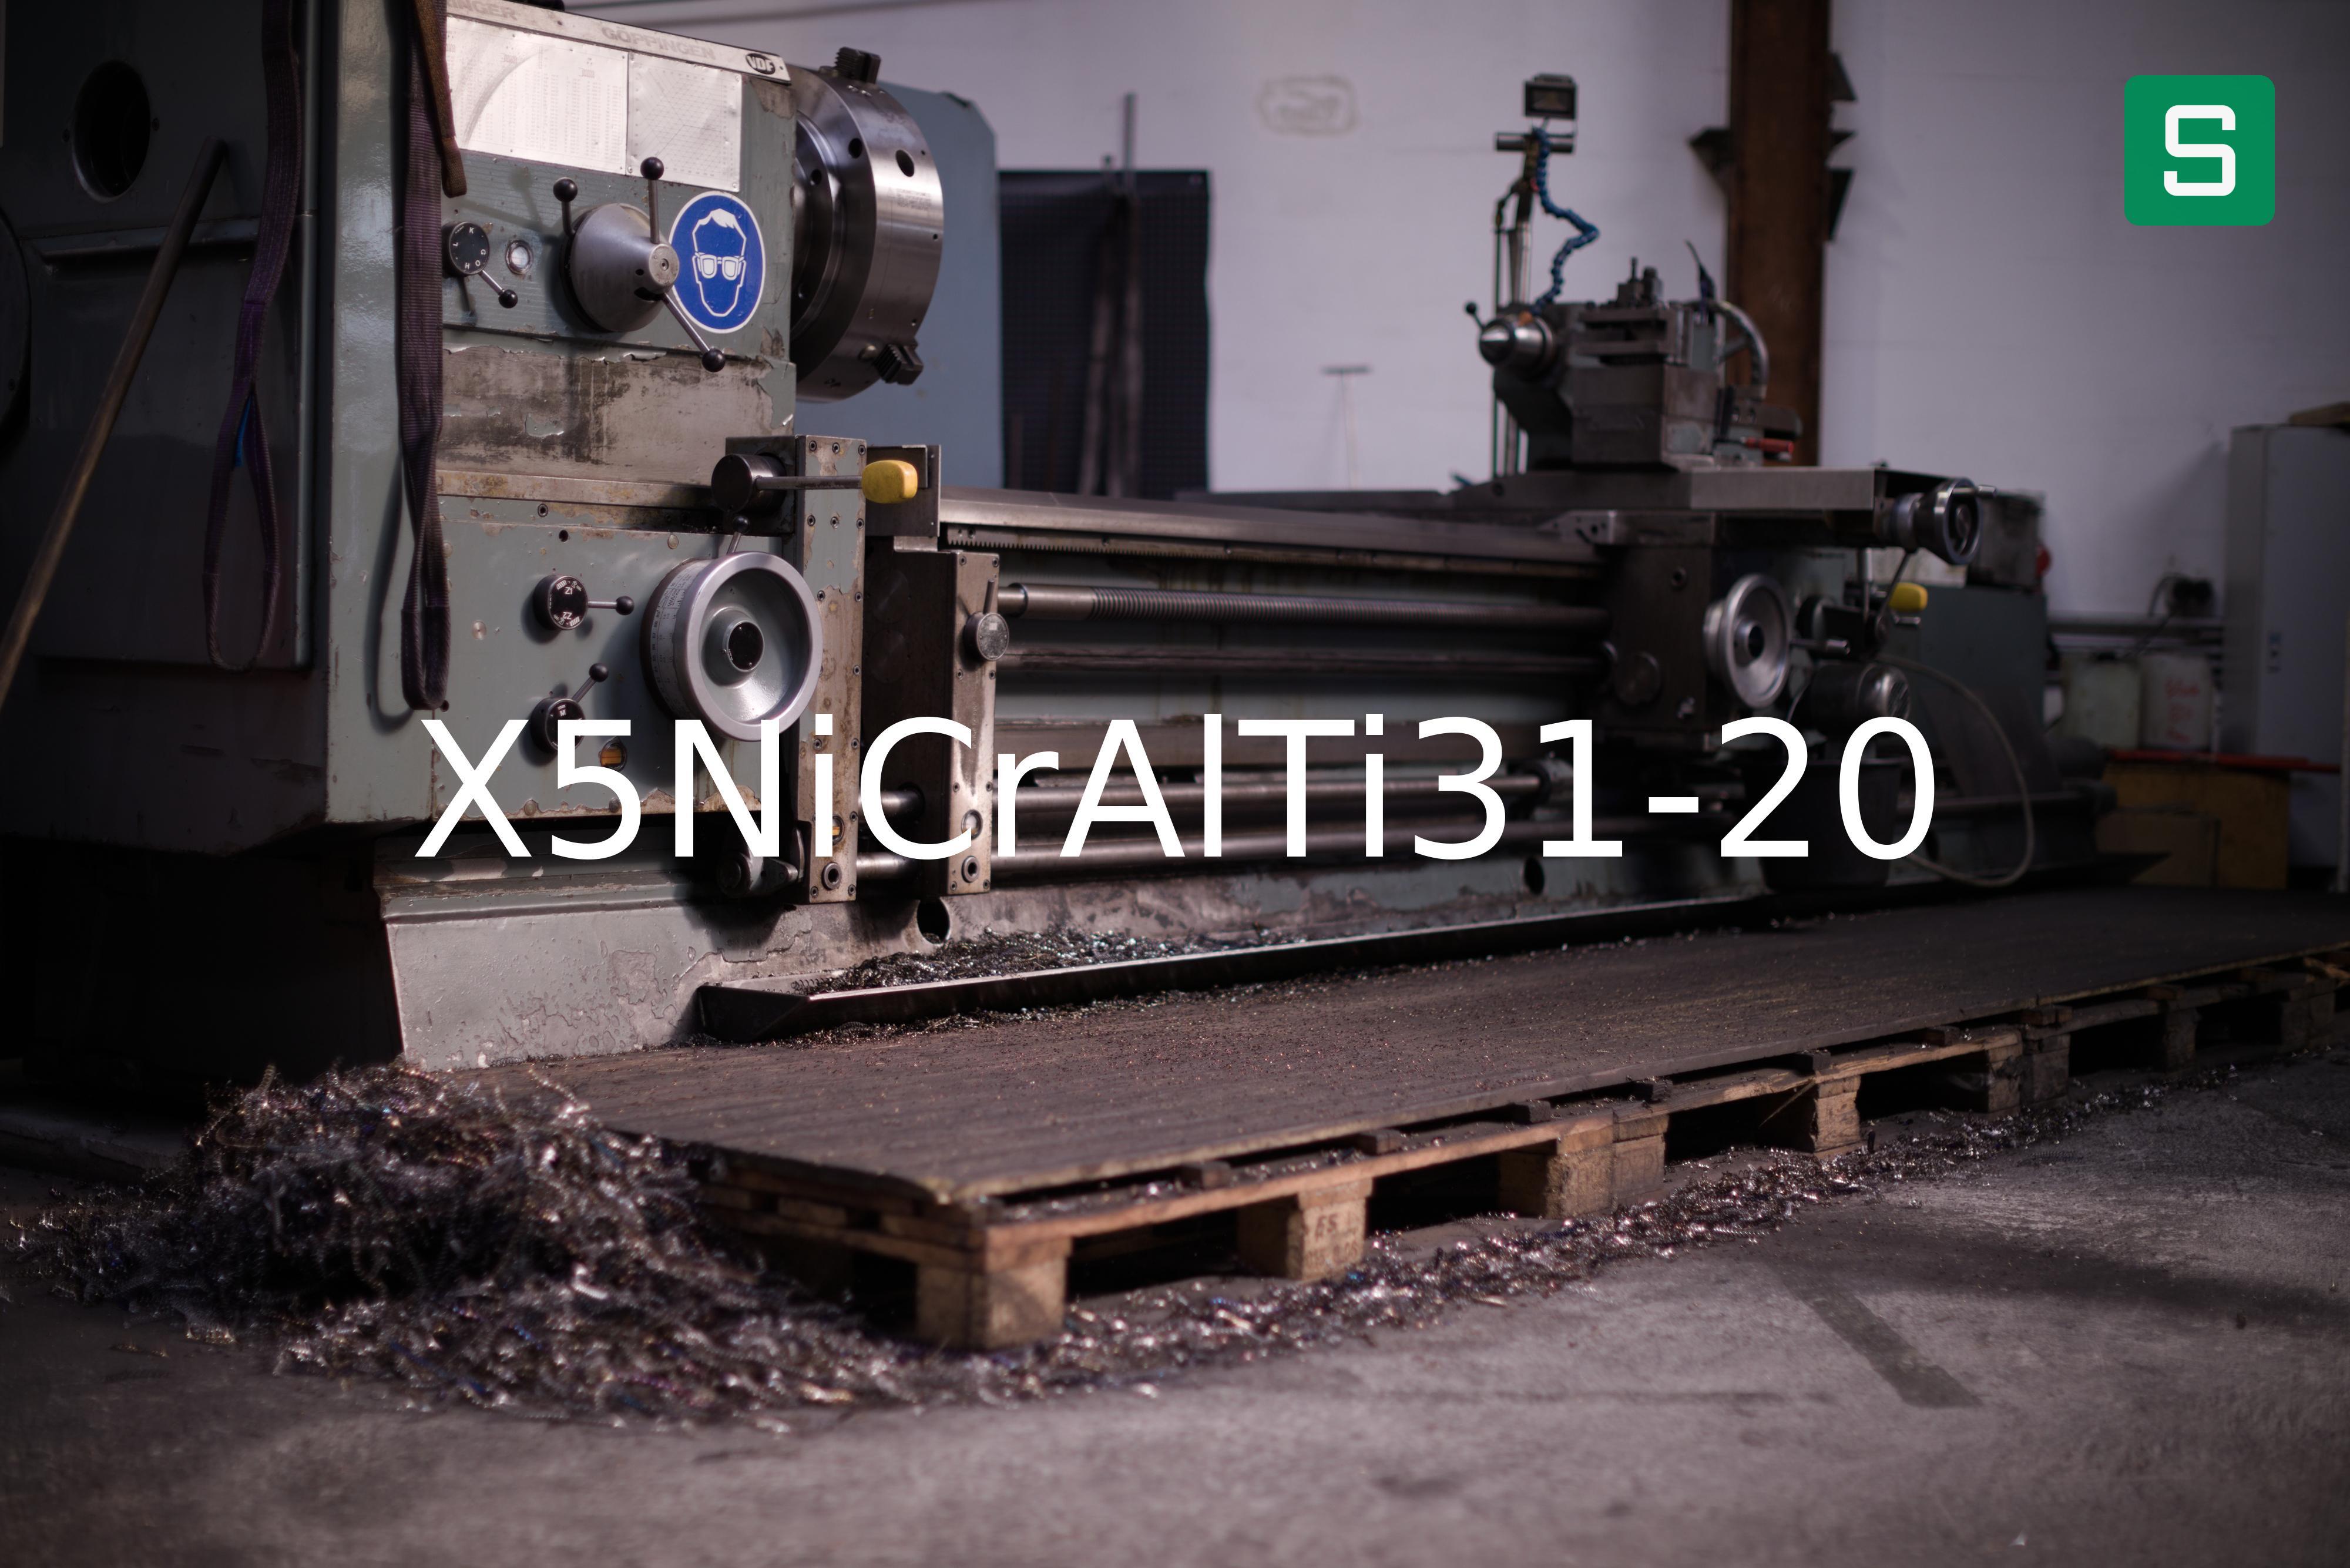 Steel Material: X5NiCrAlTi31-20